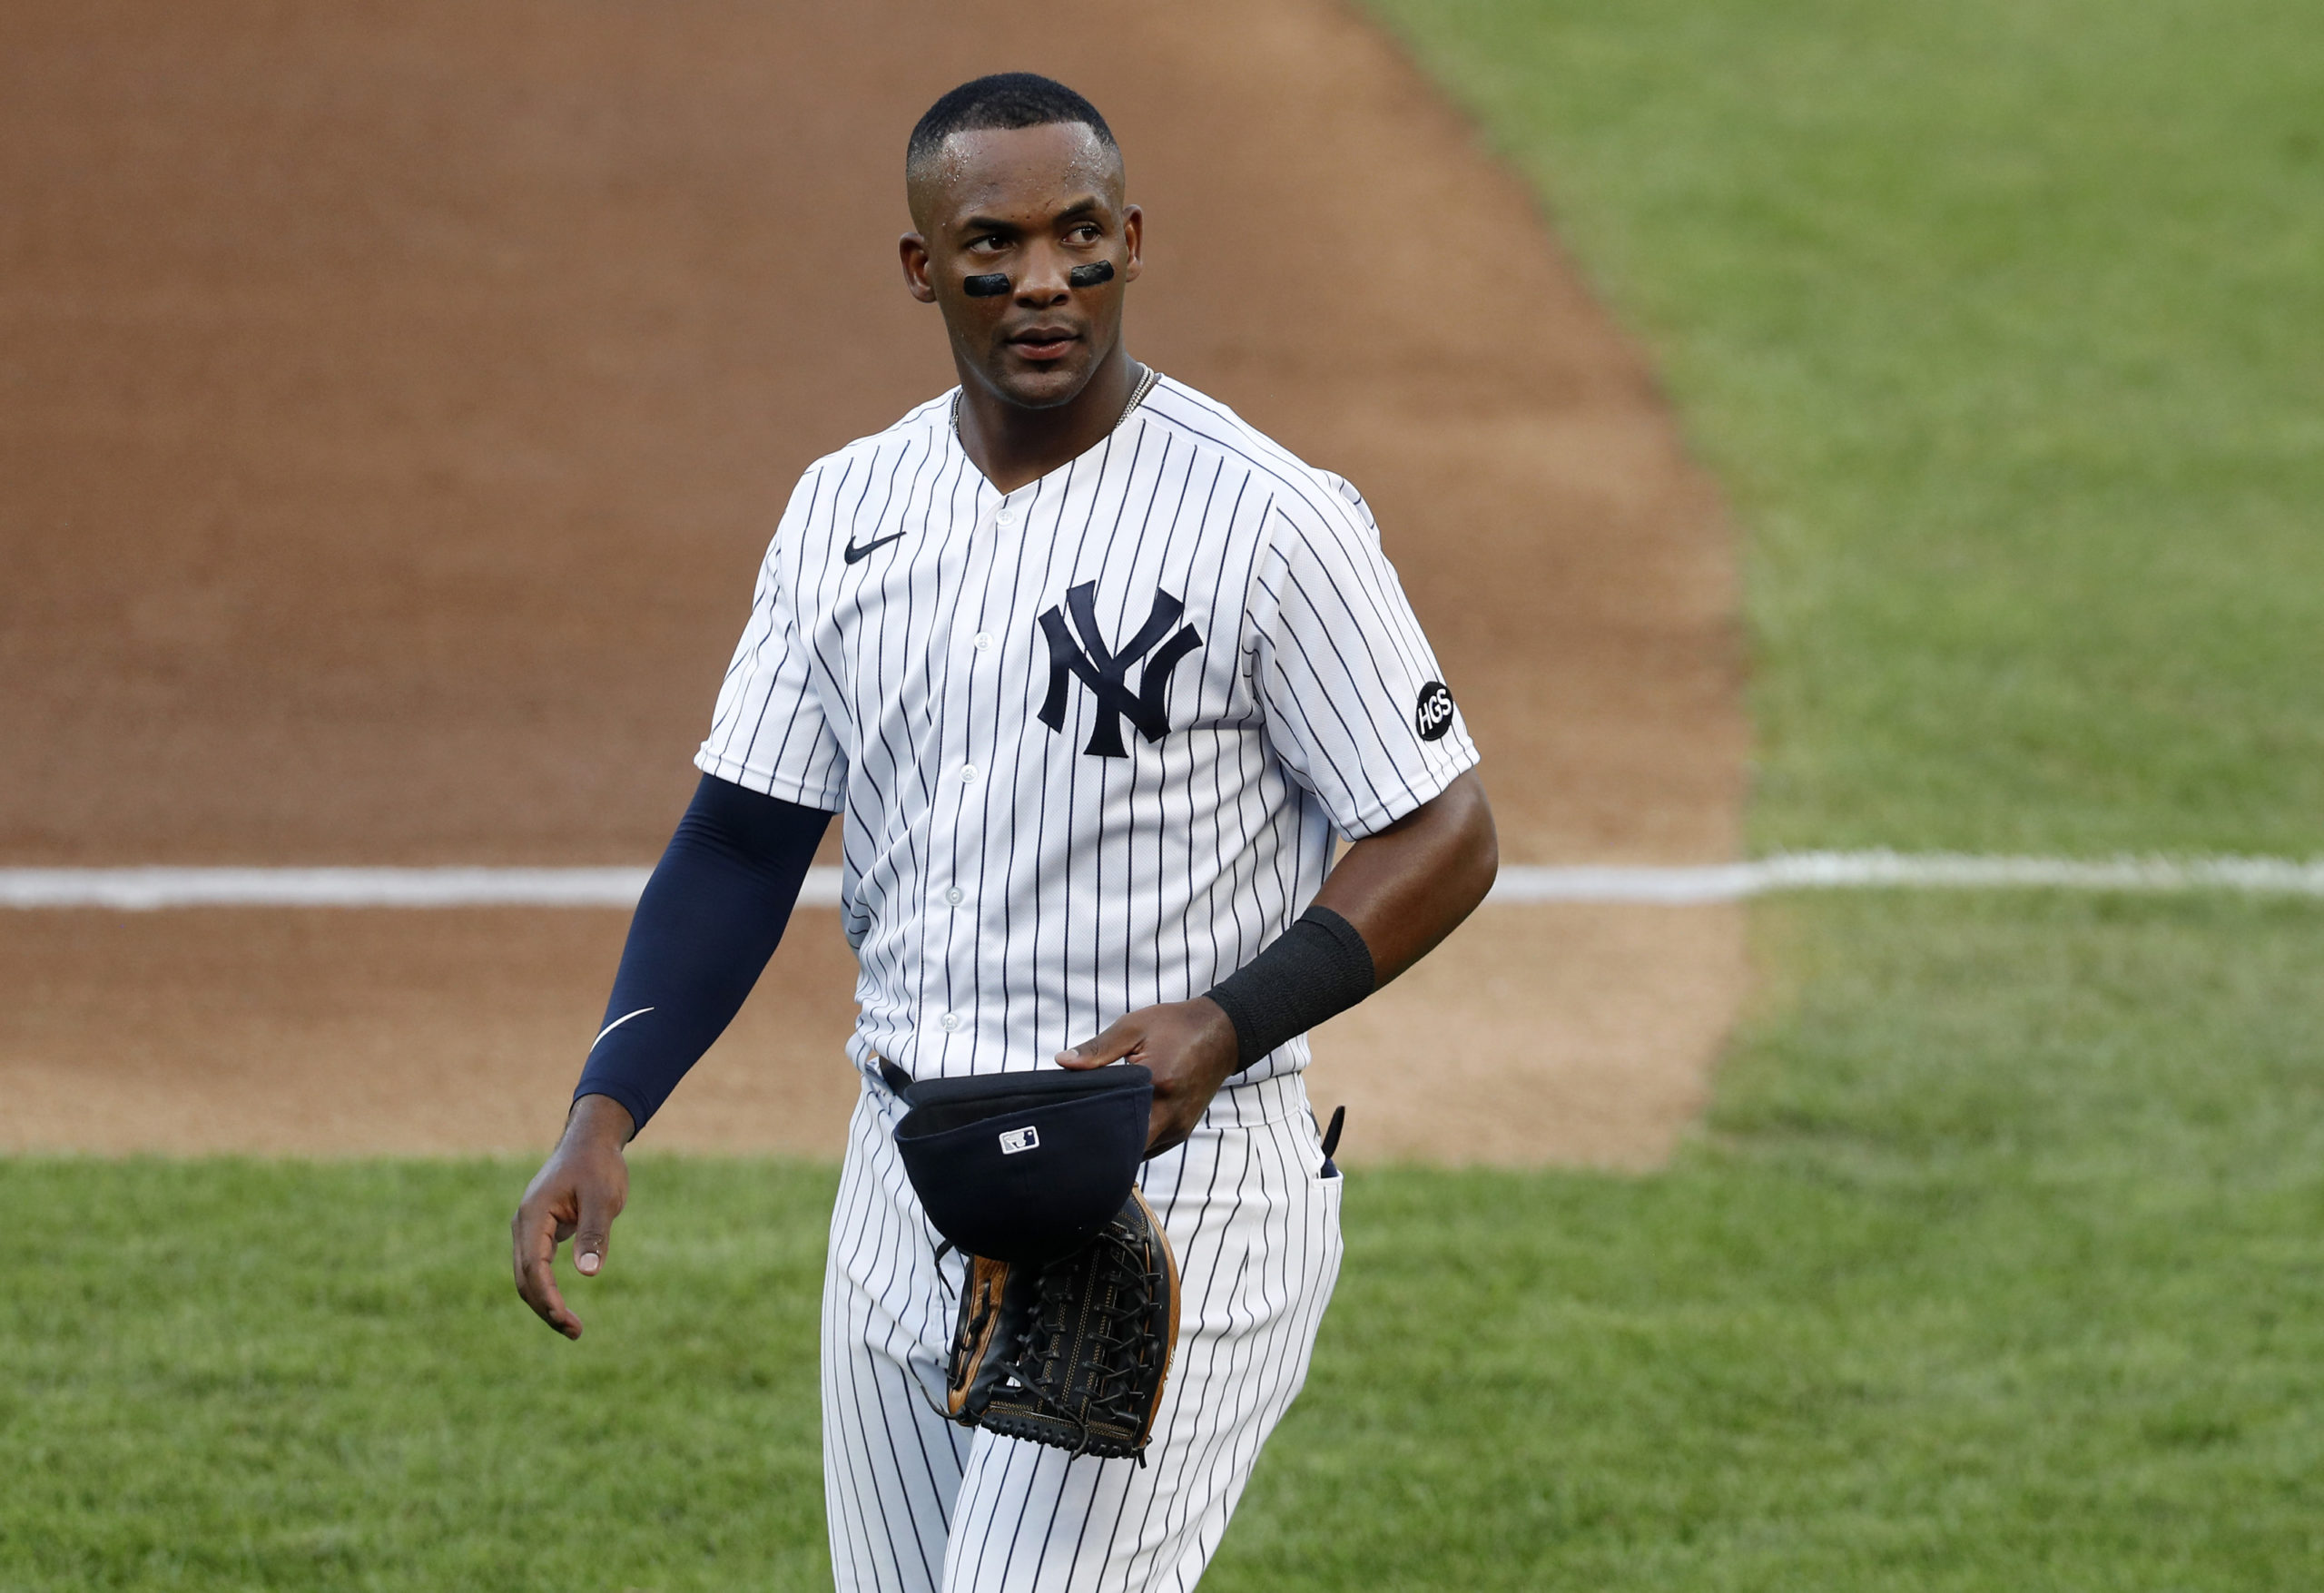 The fall of Miguel Andujar